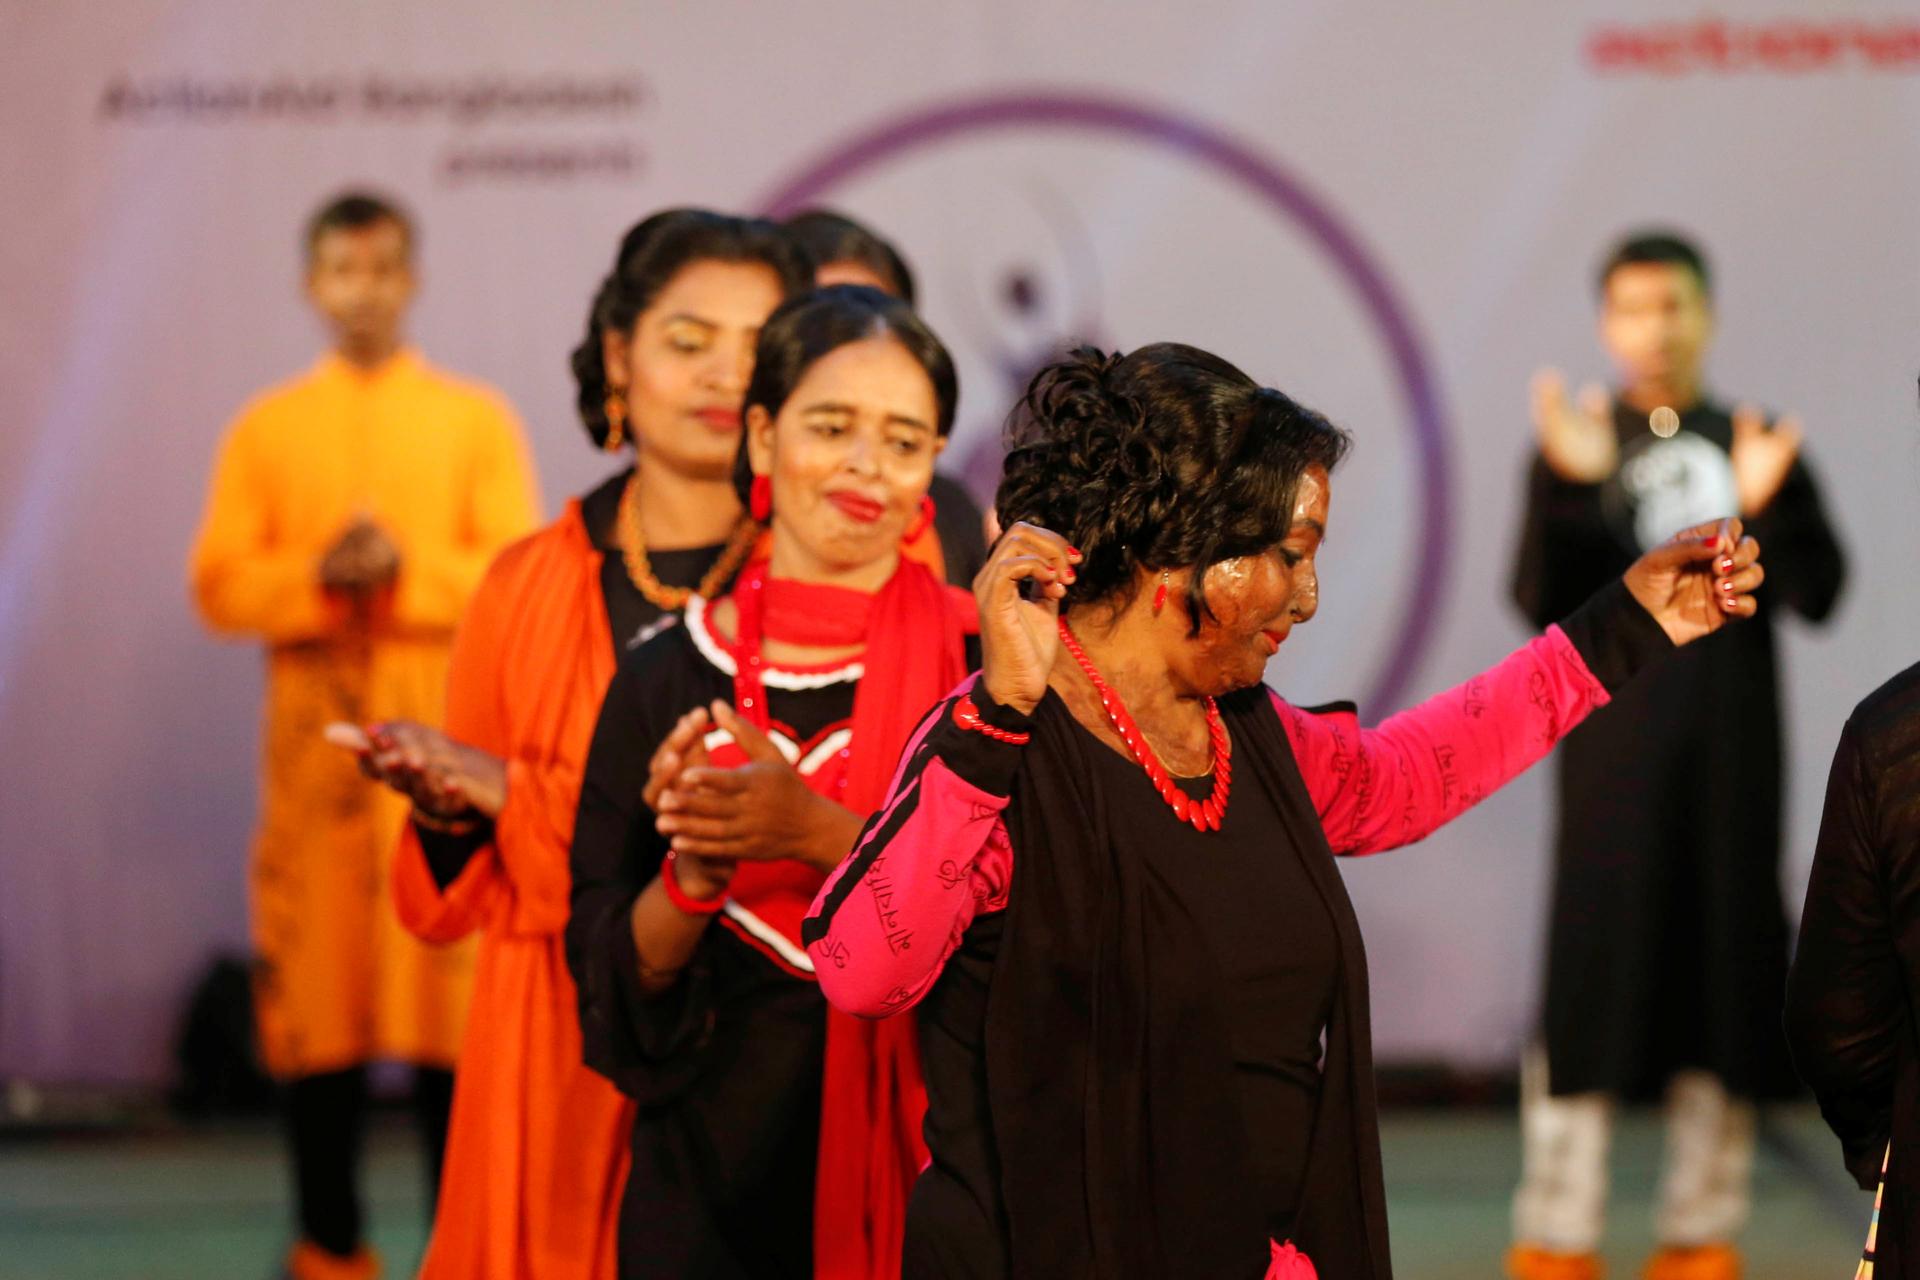 Acid attack survivors walk on the ramp as they participate in a fashion show titled “Beauty Redefined” organized by ActionAid in Bangladesh earlier this year. 